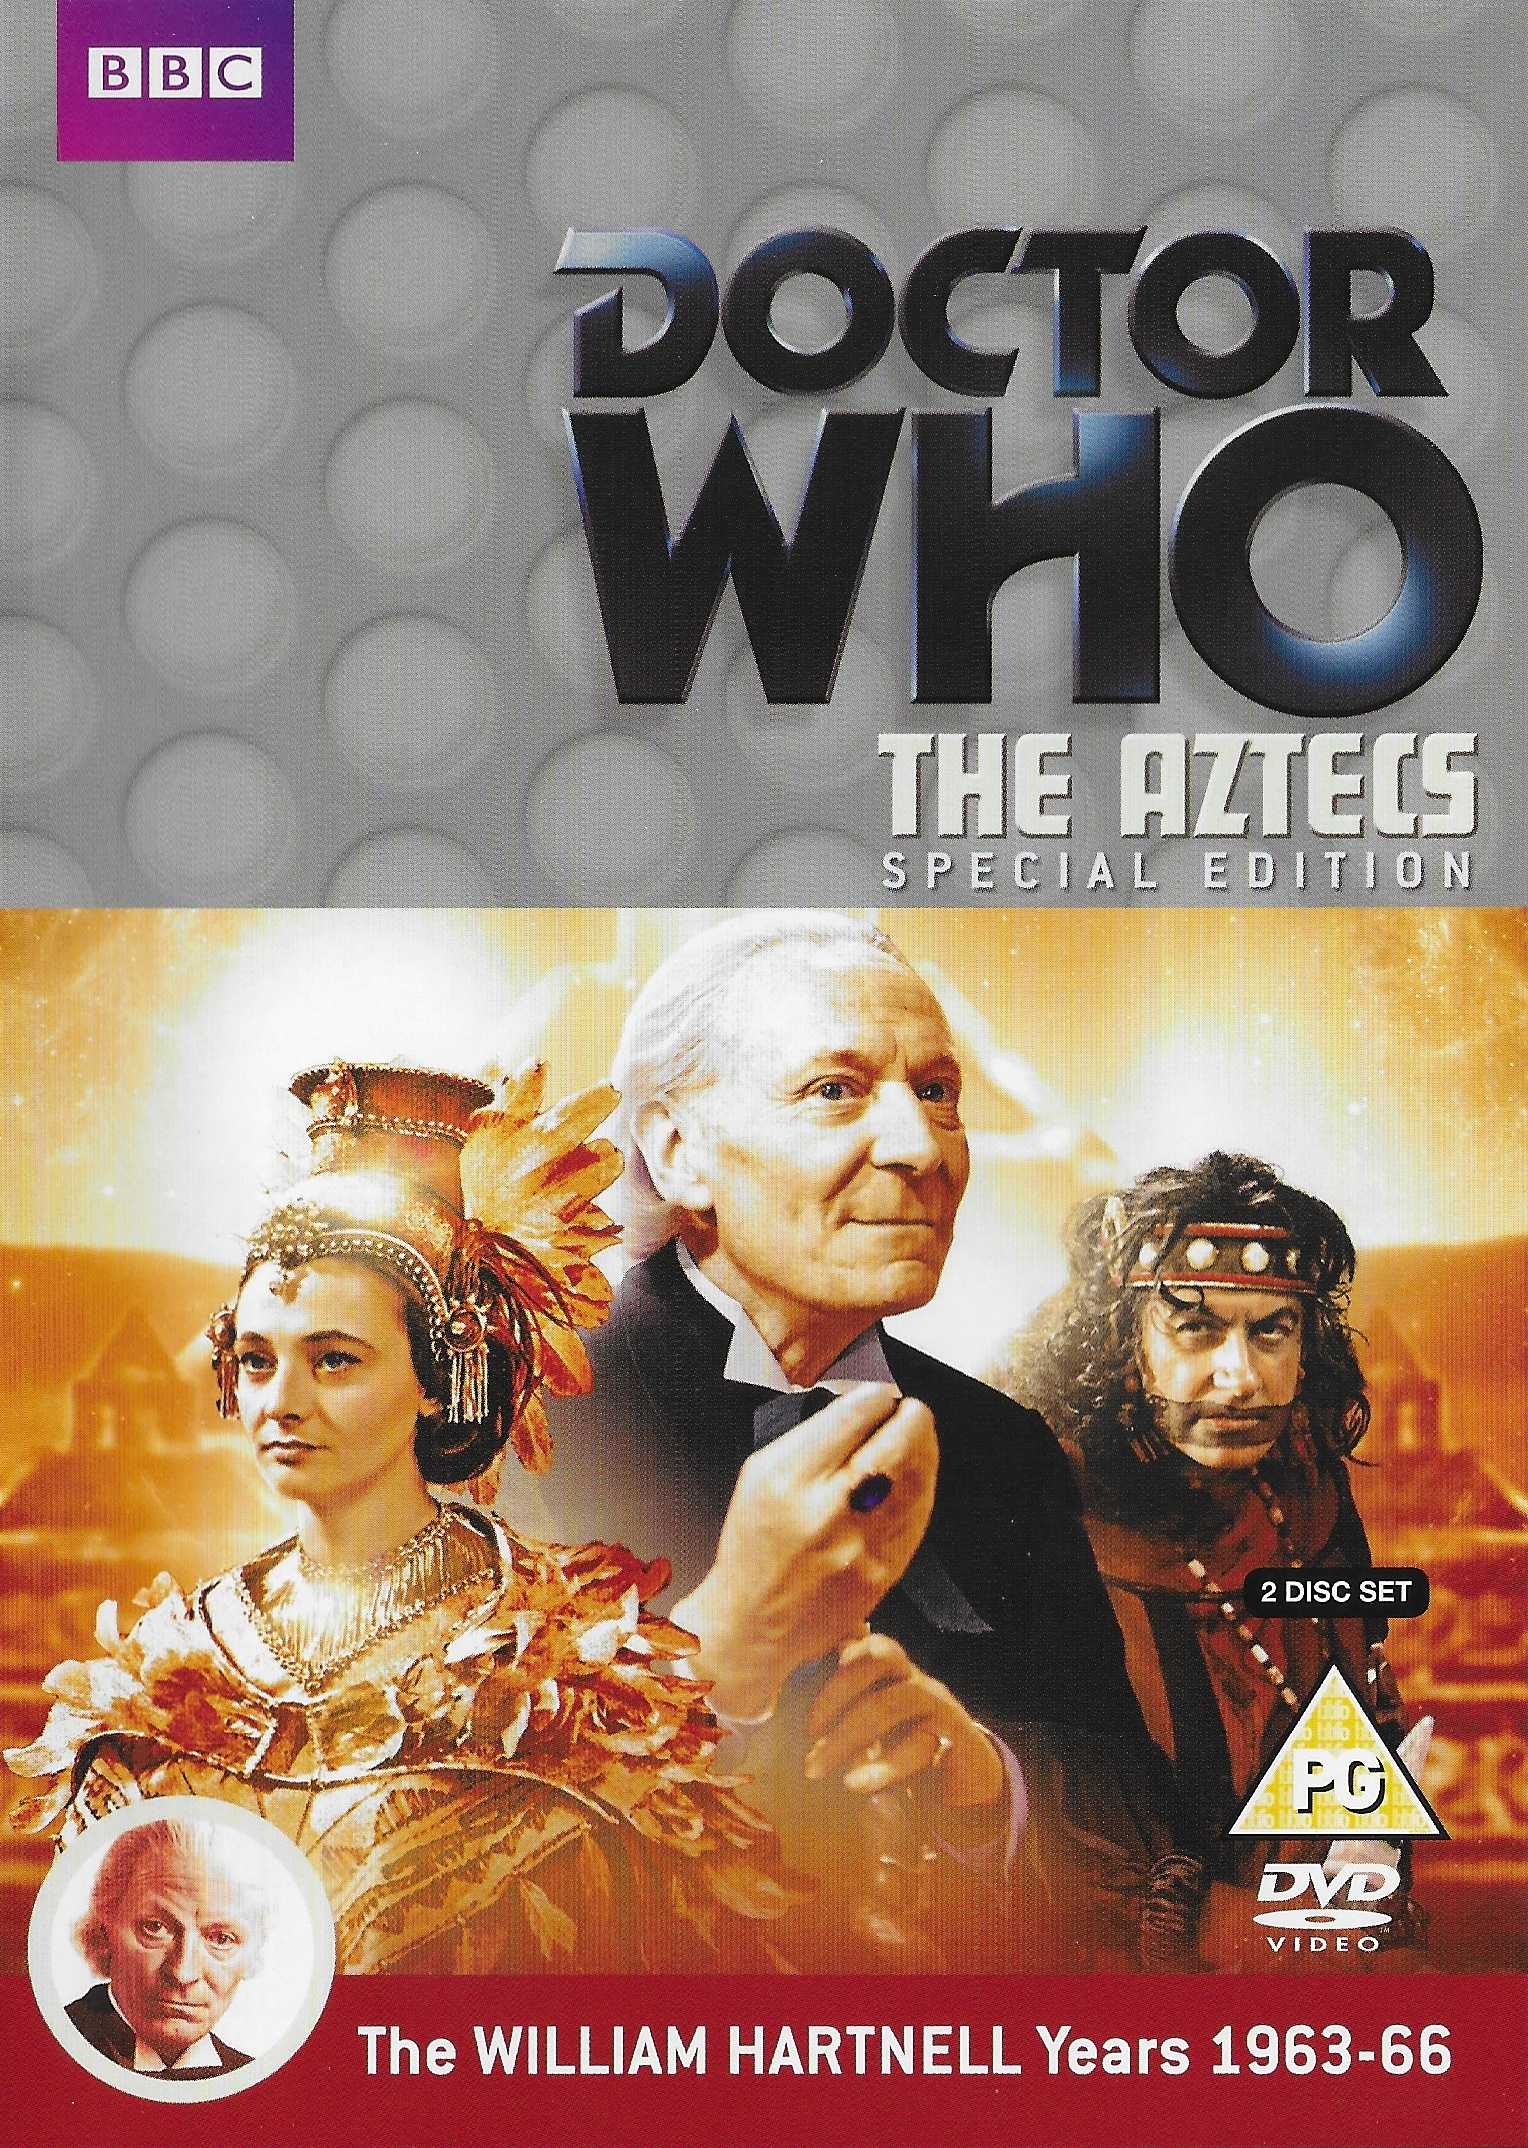 Picture of BBCDVD 3689 Doctor Who - The Aztecs (Special edition) by artist John Lucarotti from the BBC dvds - Records and Tapes library